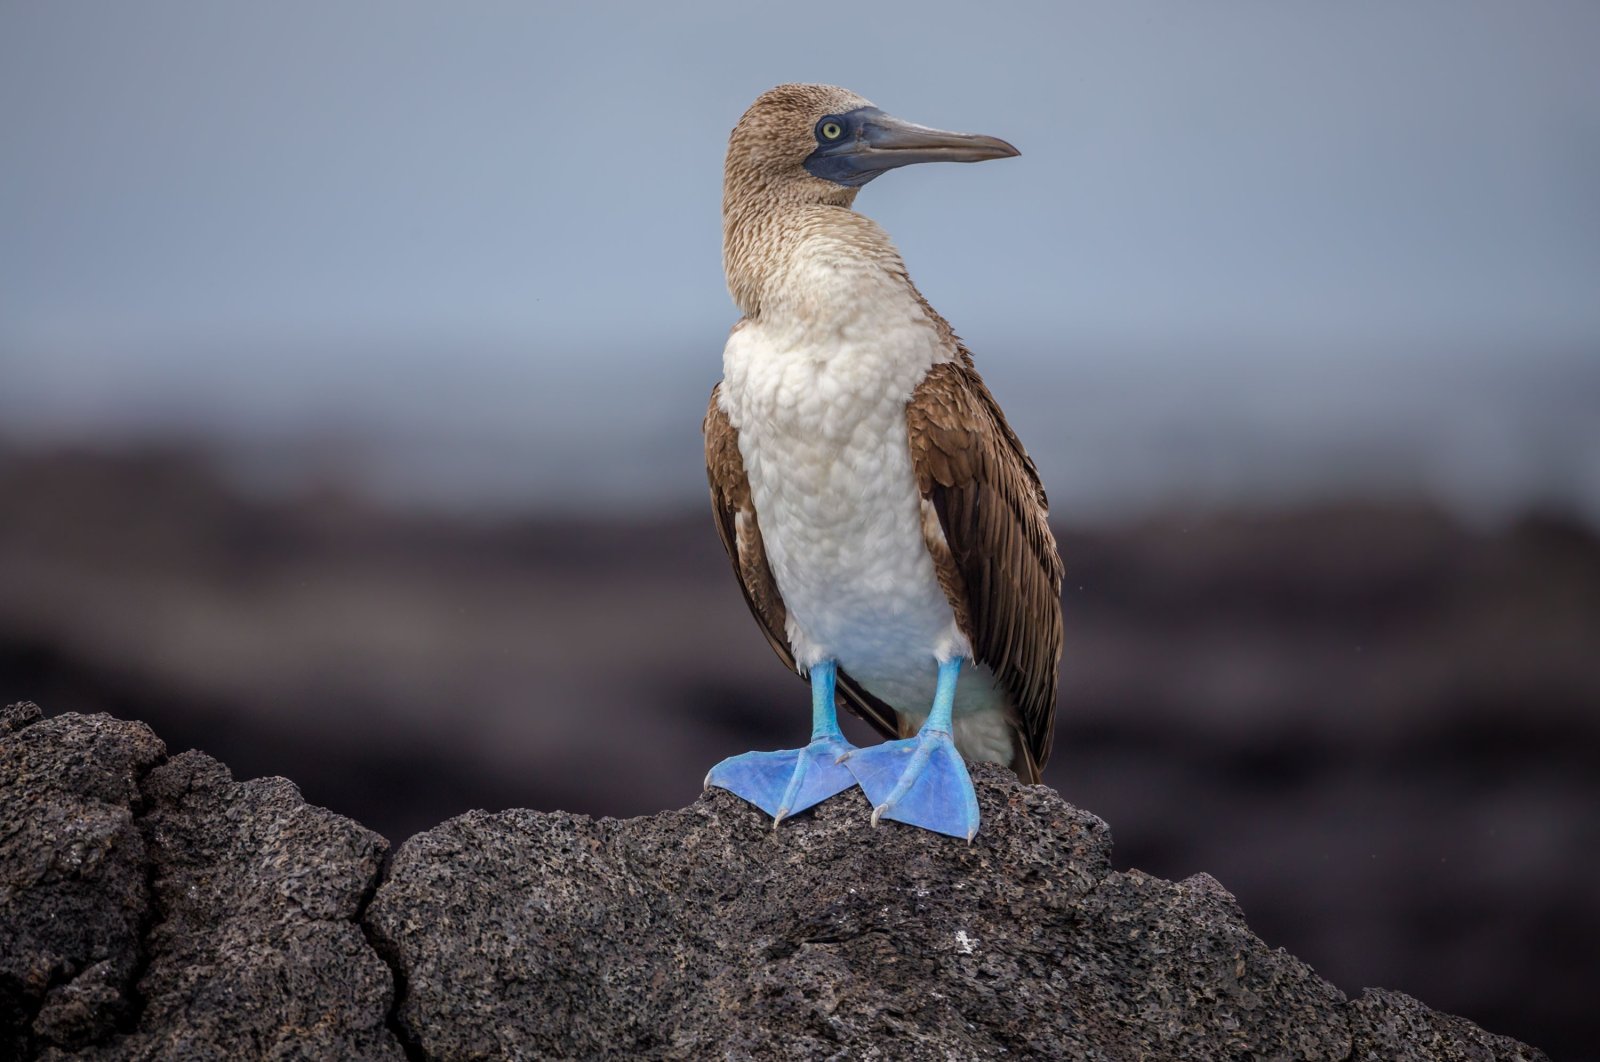 A blue-footed booby in Galapagos Islands, Ecuador. (Shutterstock Photo)